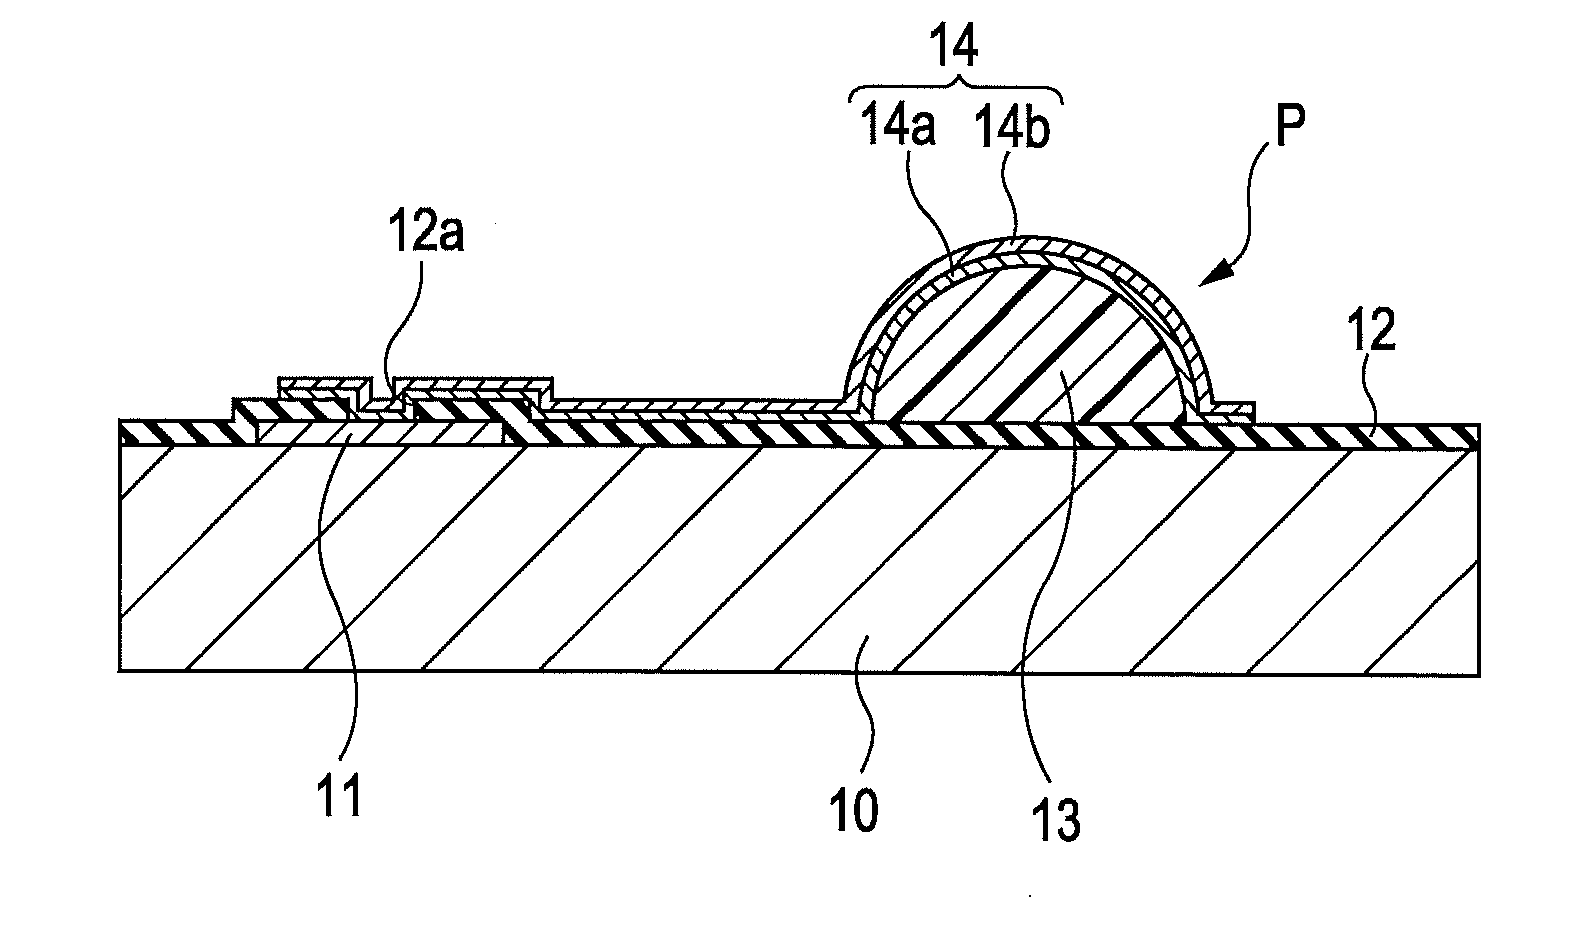 Mounting structure, electro-optical device, electronic apparatus, and method of producing the mounting structure